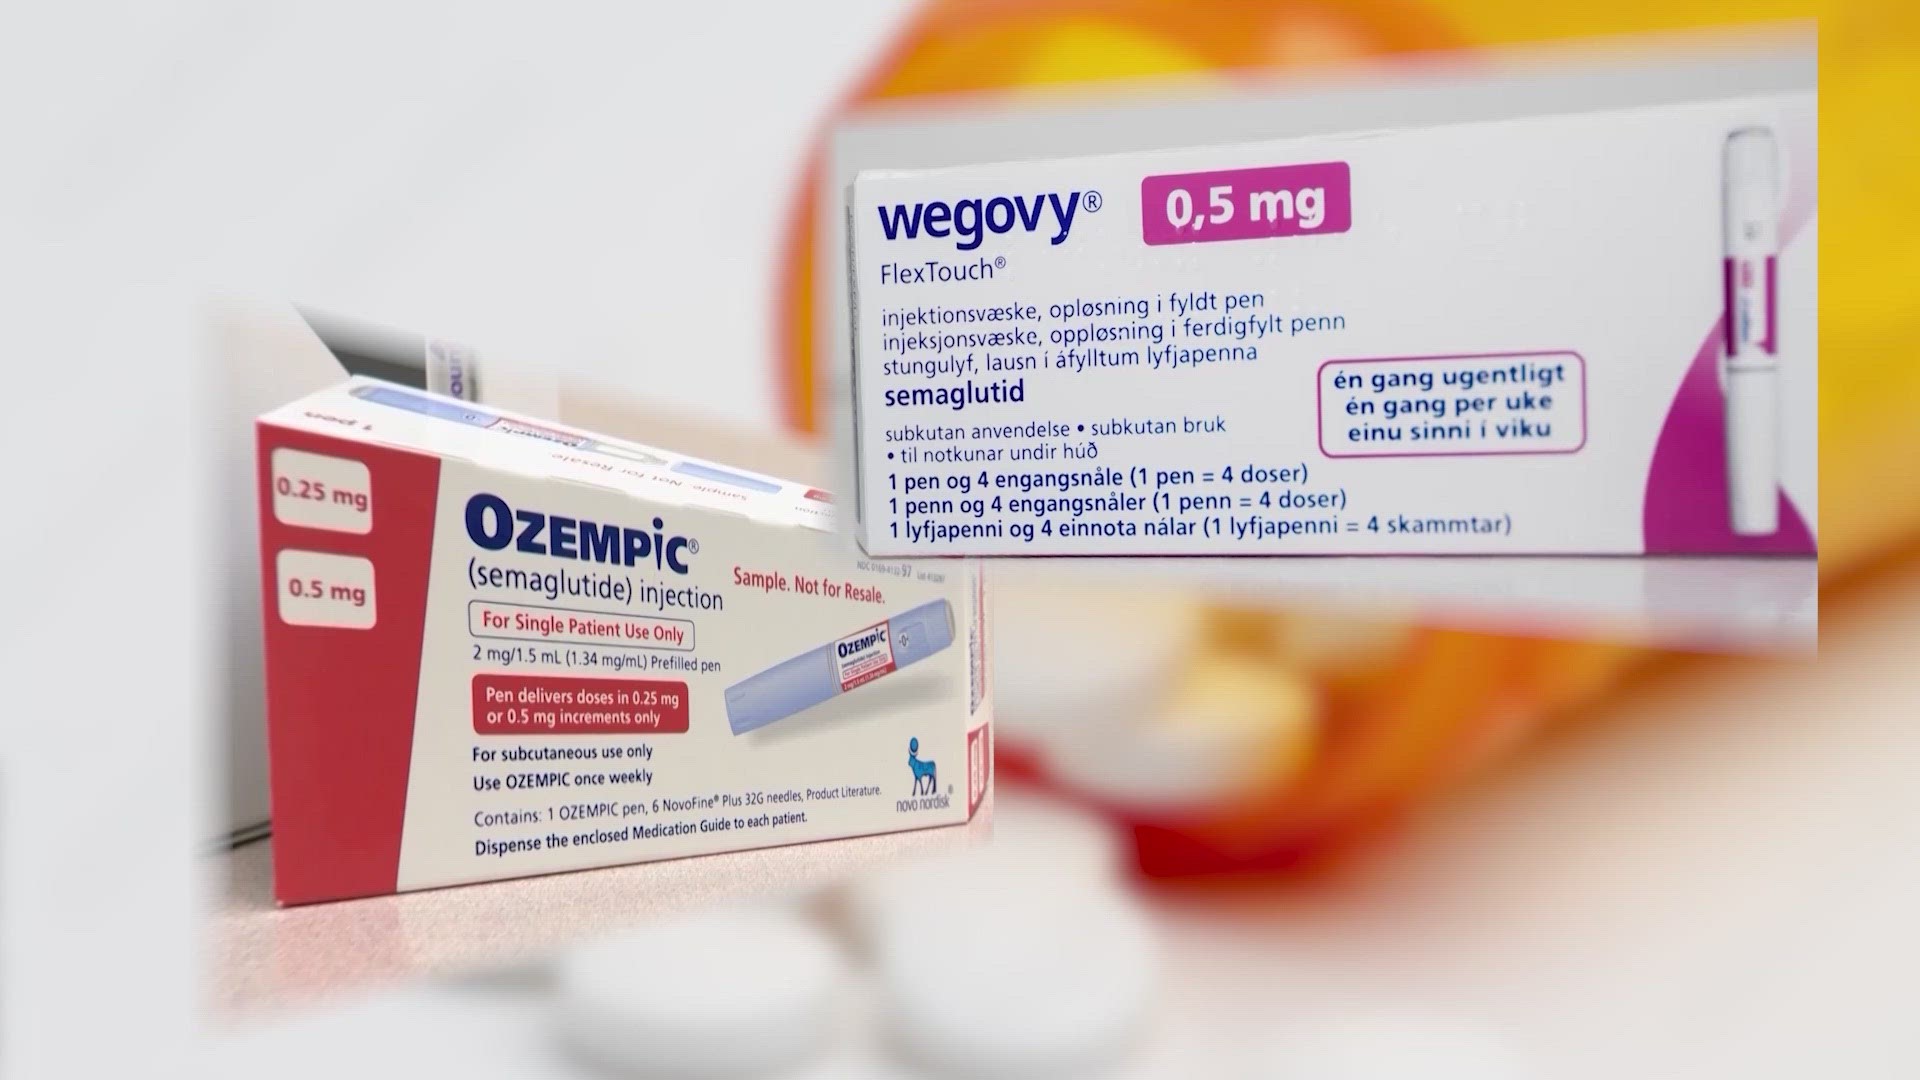 Those who use Ozempic and Wegovy to lose weight have reported a new side effect -- the drugs lessening their addictive behaviors or tendencies.